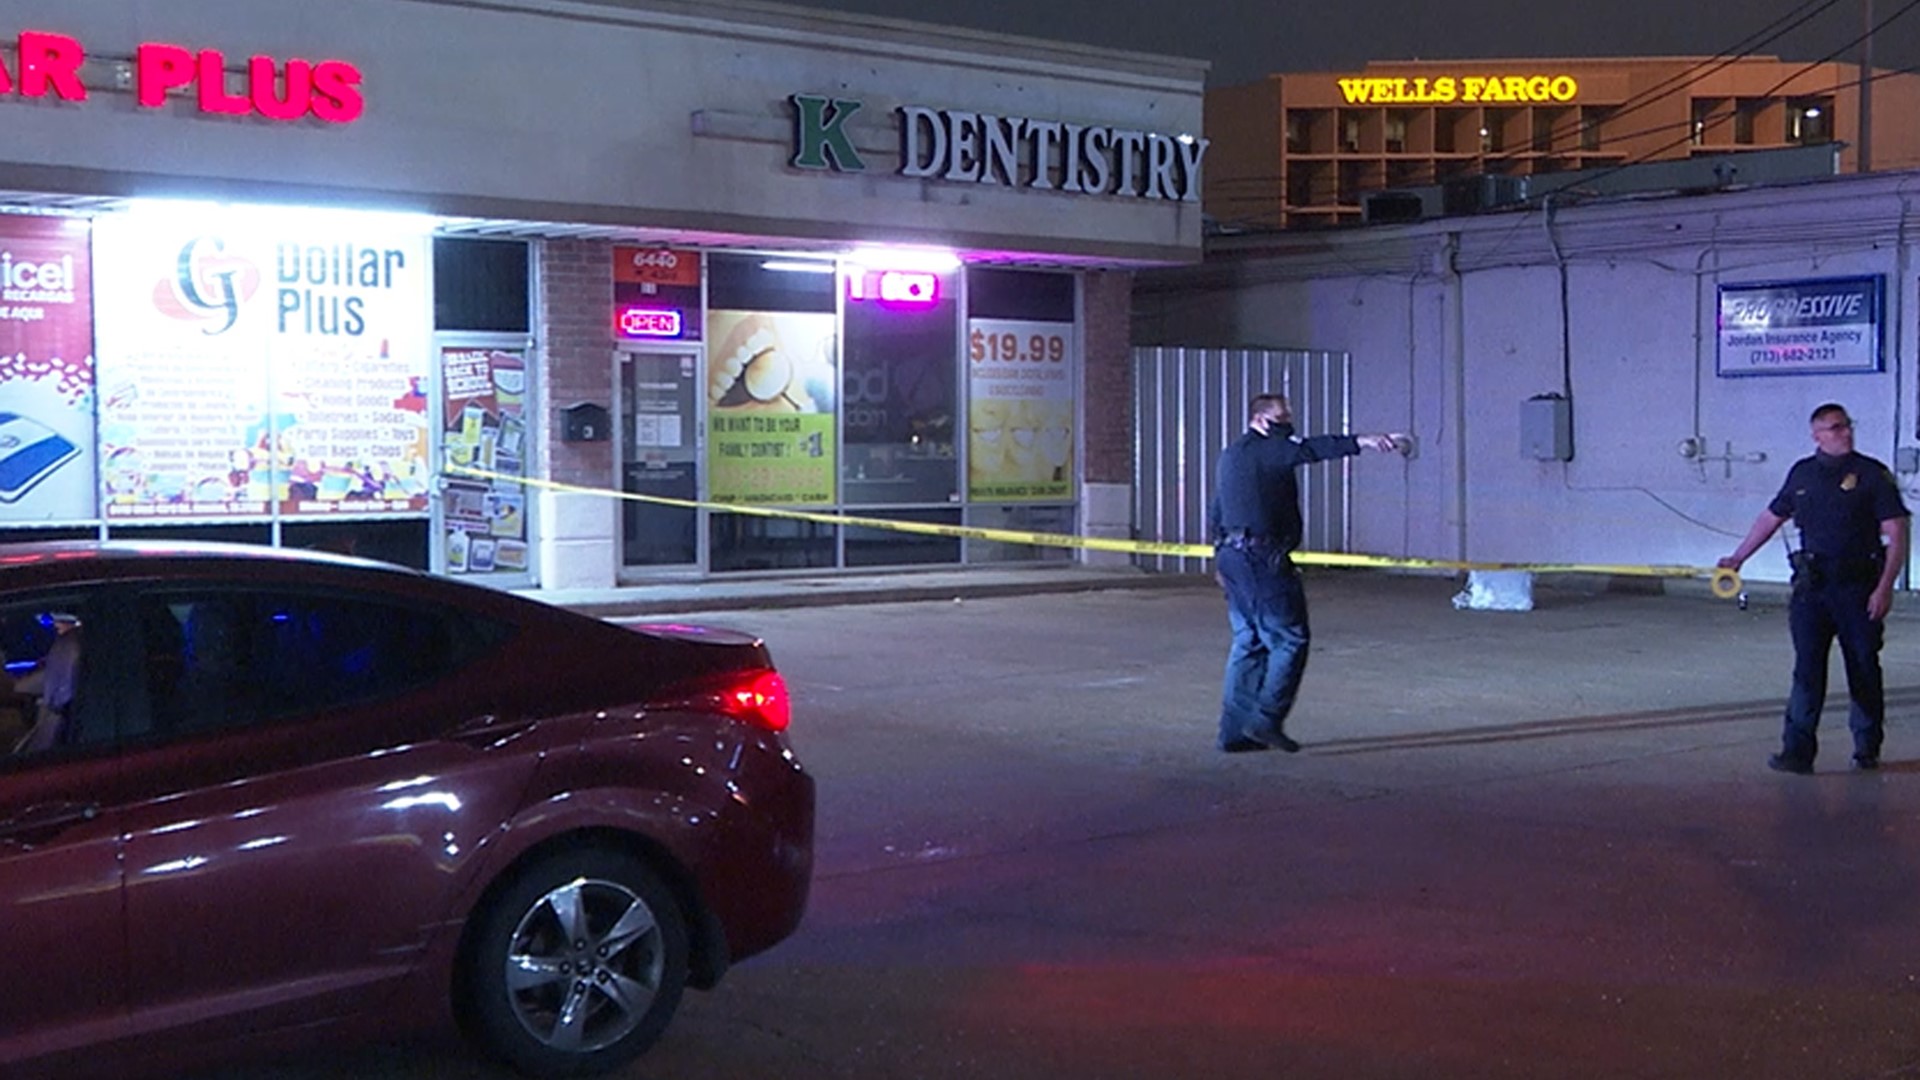 The shooting was reported before 10 p.m. Wednesday outside a discount corner store in the 6400 block of W. 43rd.